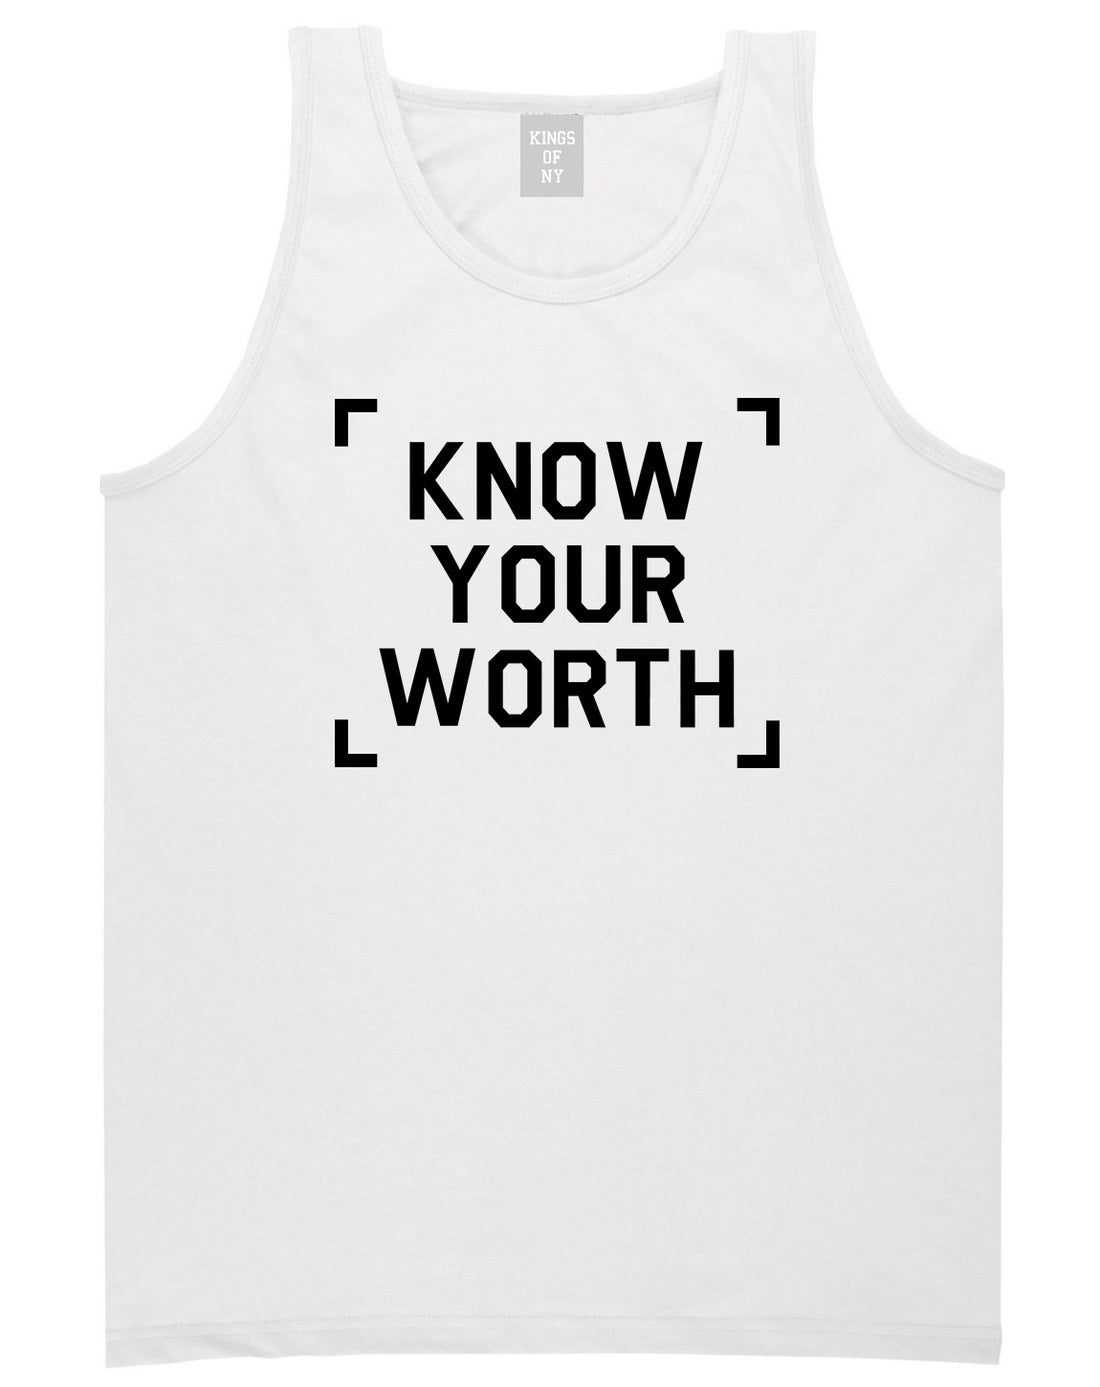 Know Your Worth Mens Tank Top Shirt White by Kings Of NY